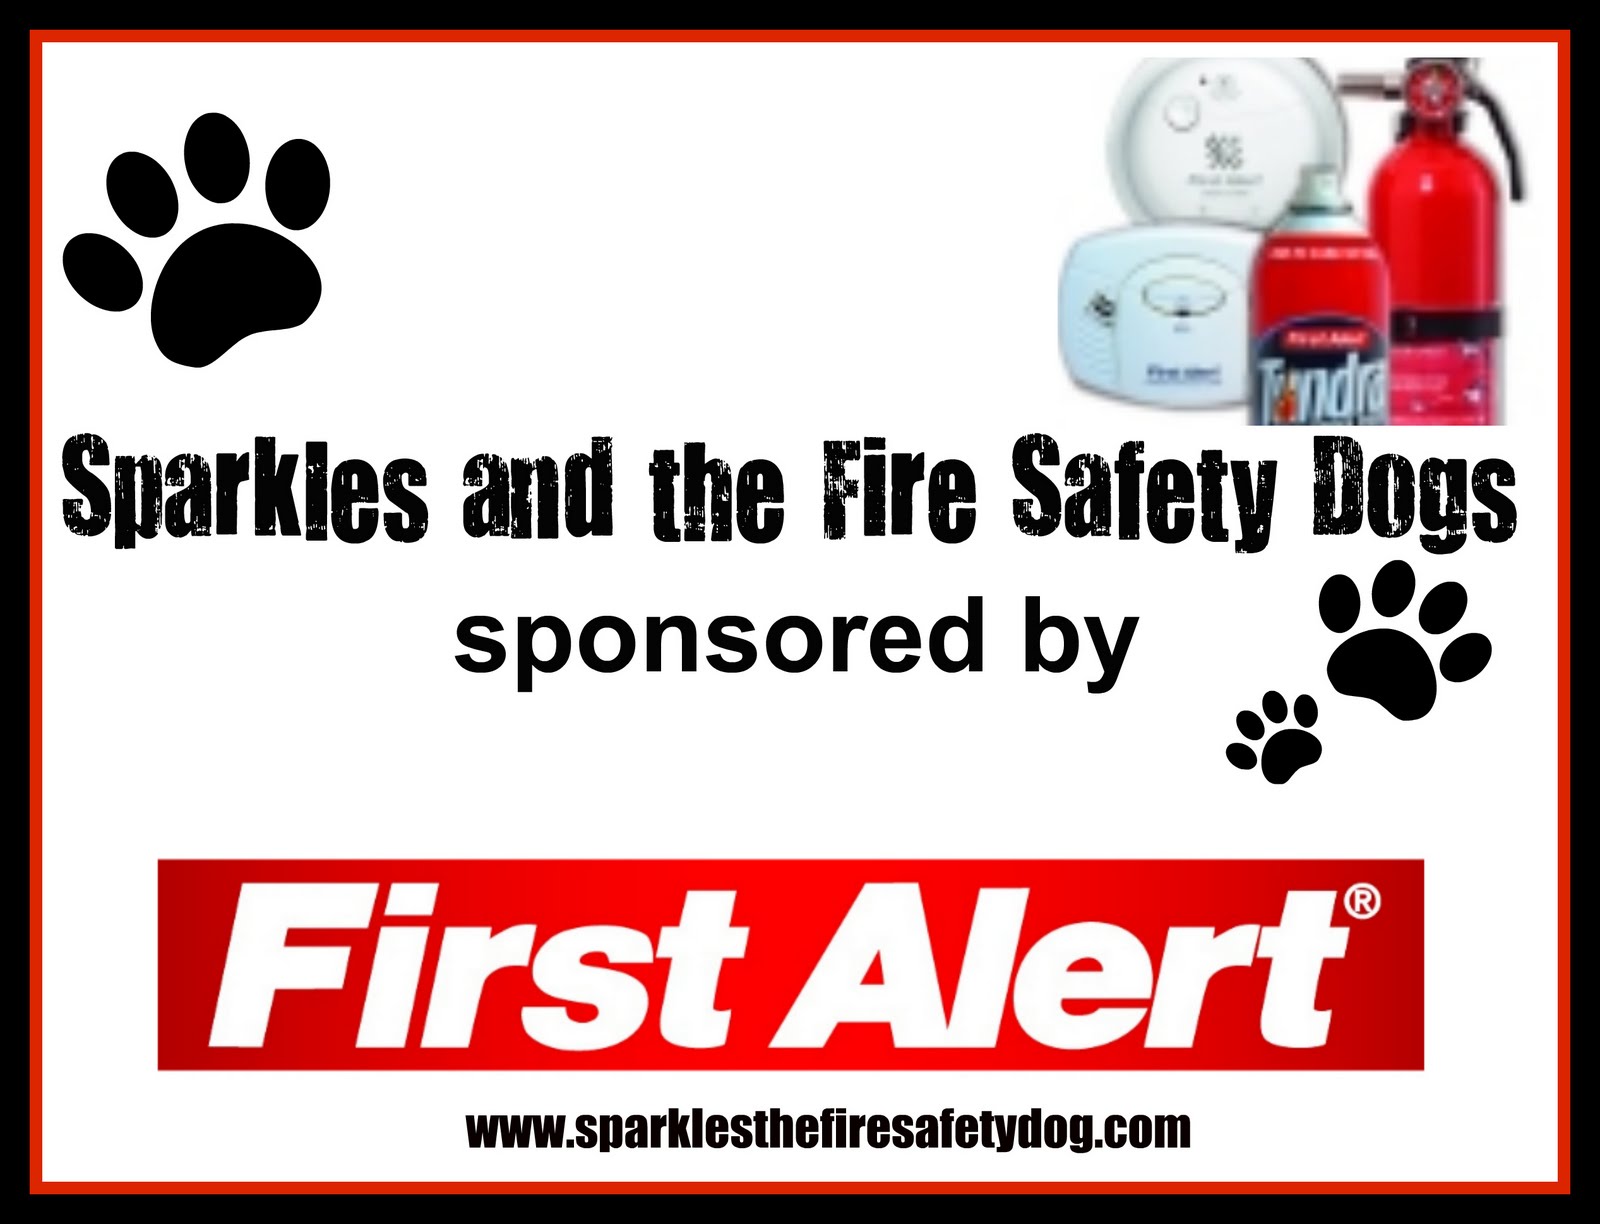 Thank you to our sponsor, First Alert.